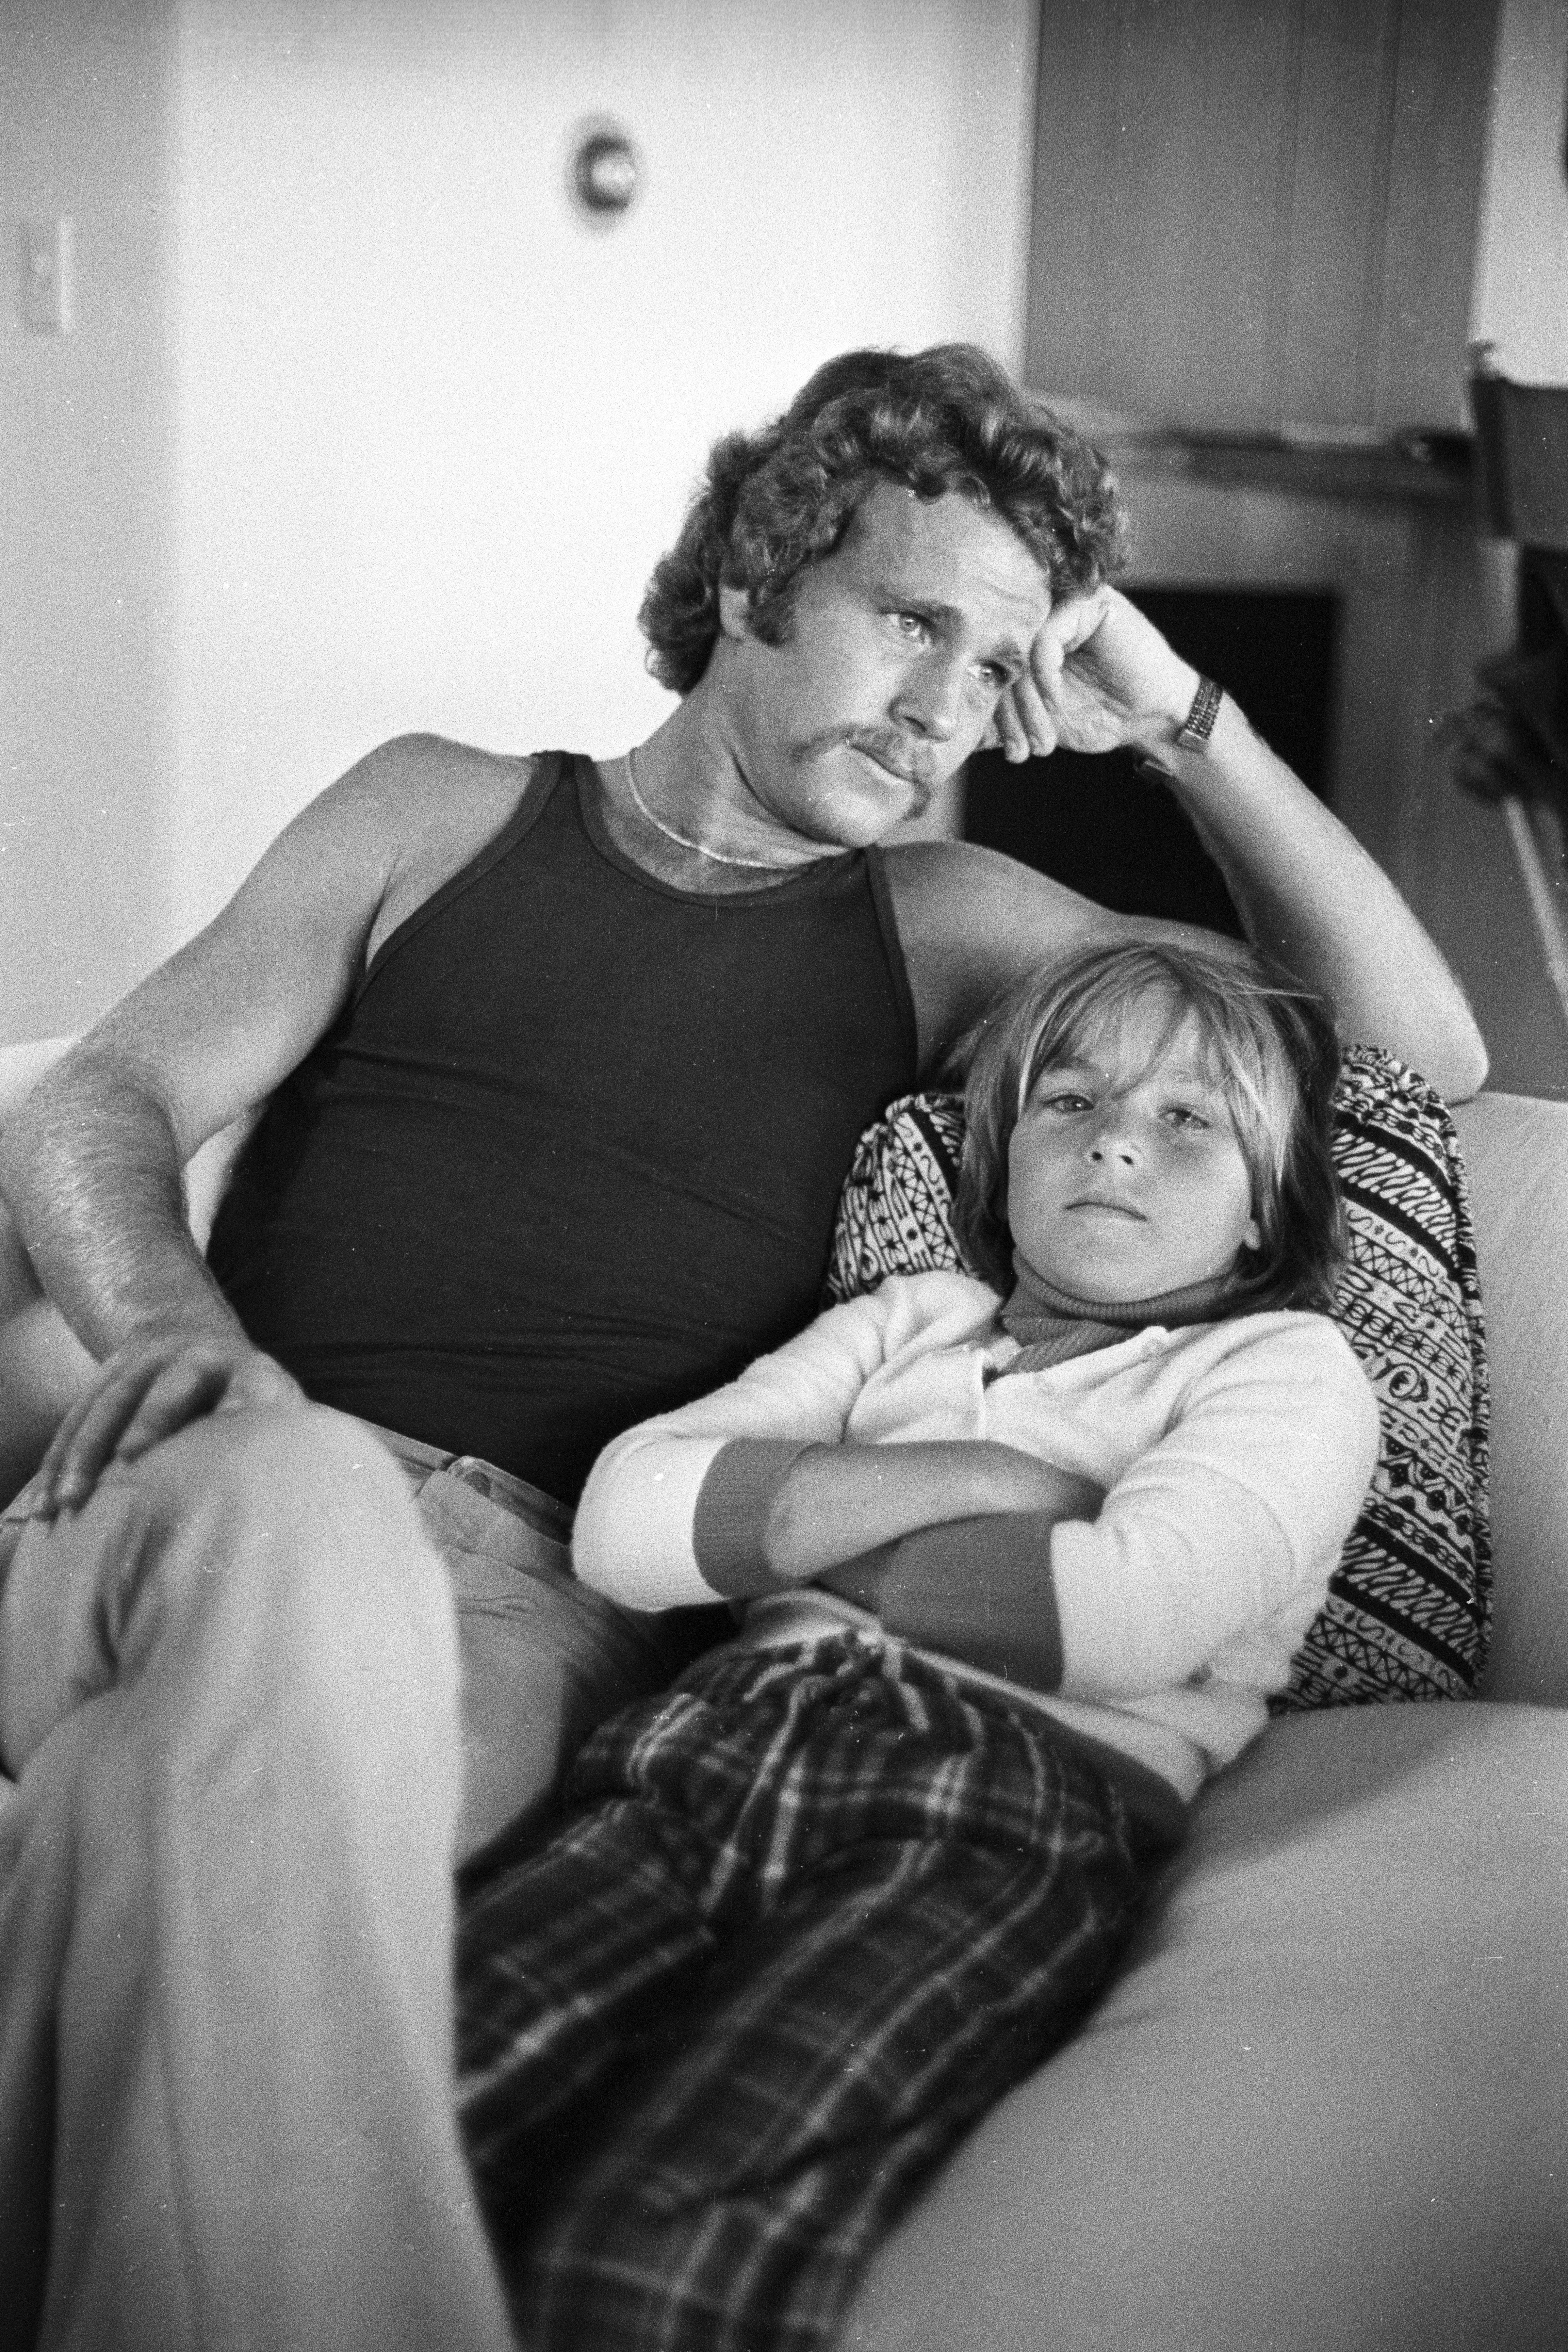 Ryan O'Neal posing with his daughter Tatum O'Neil on April 27, 1973 in Malibu, California | Source: Getty Images